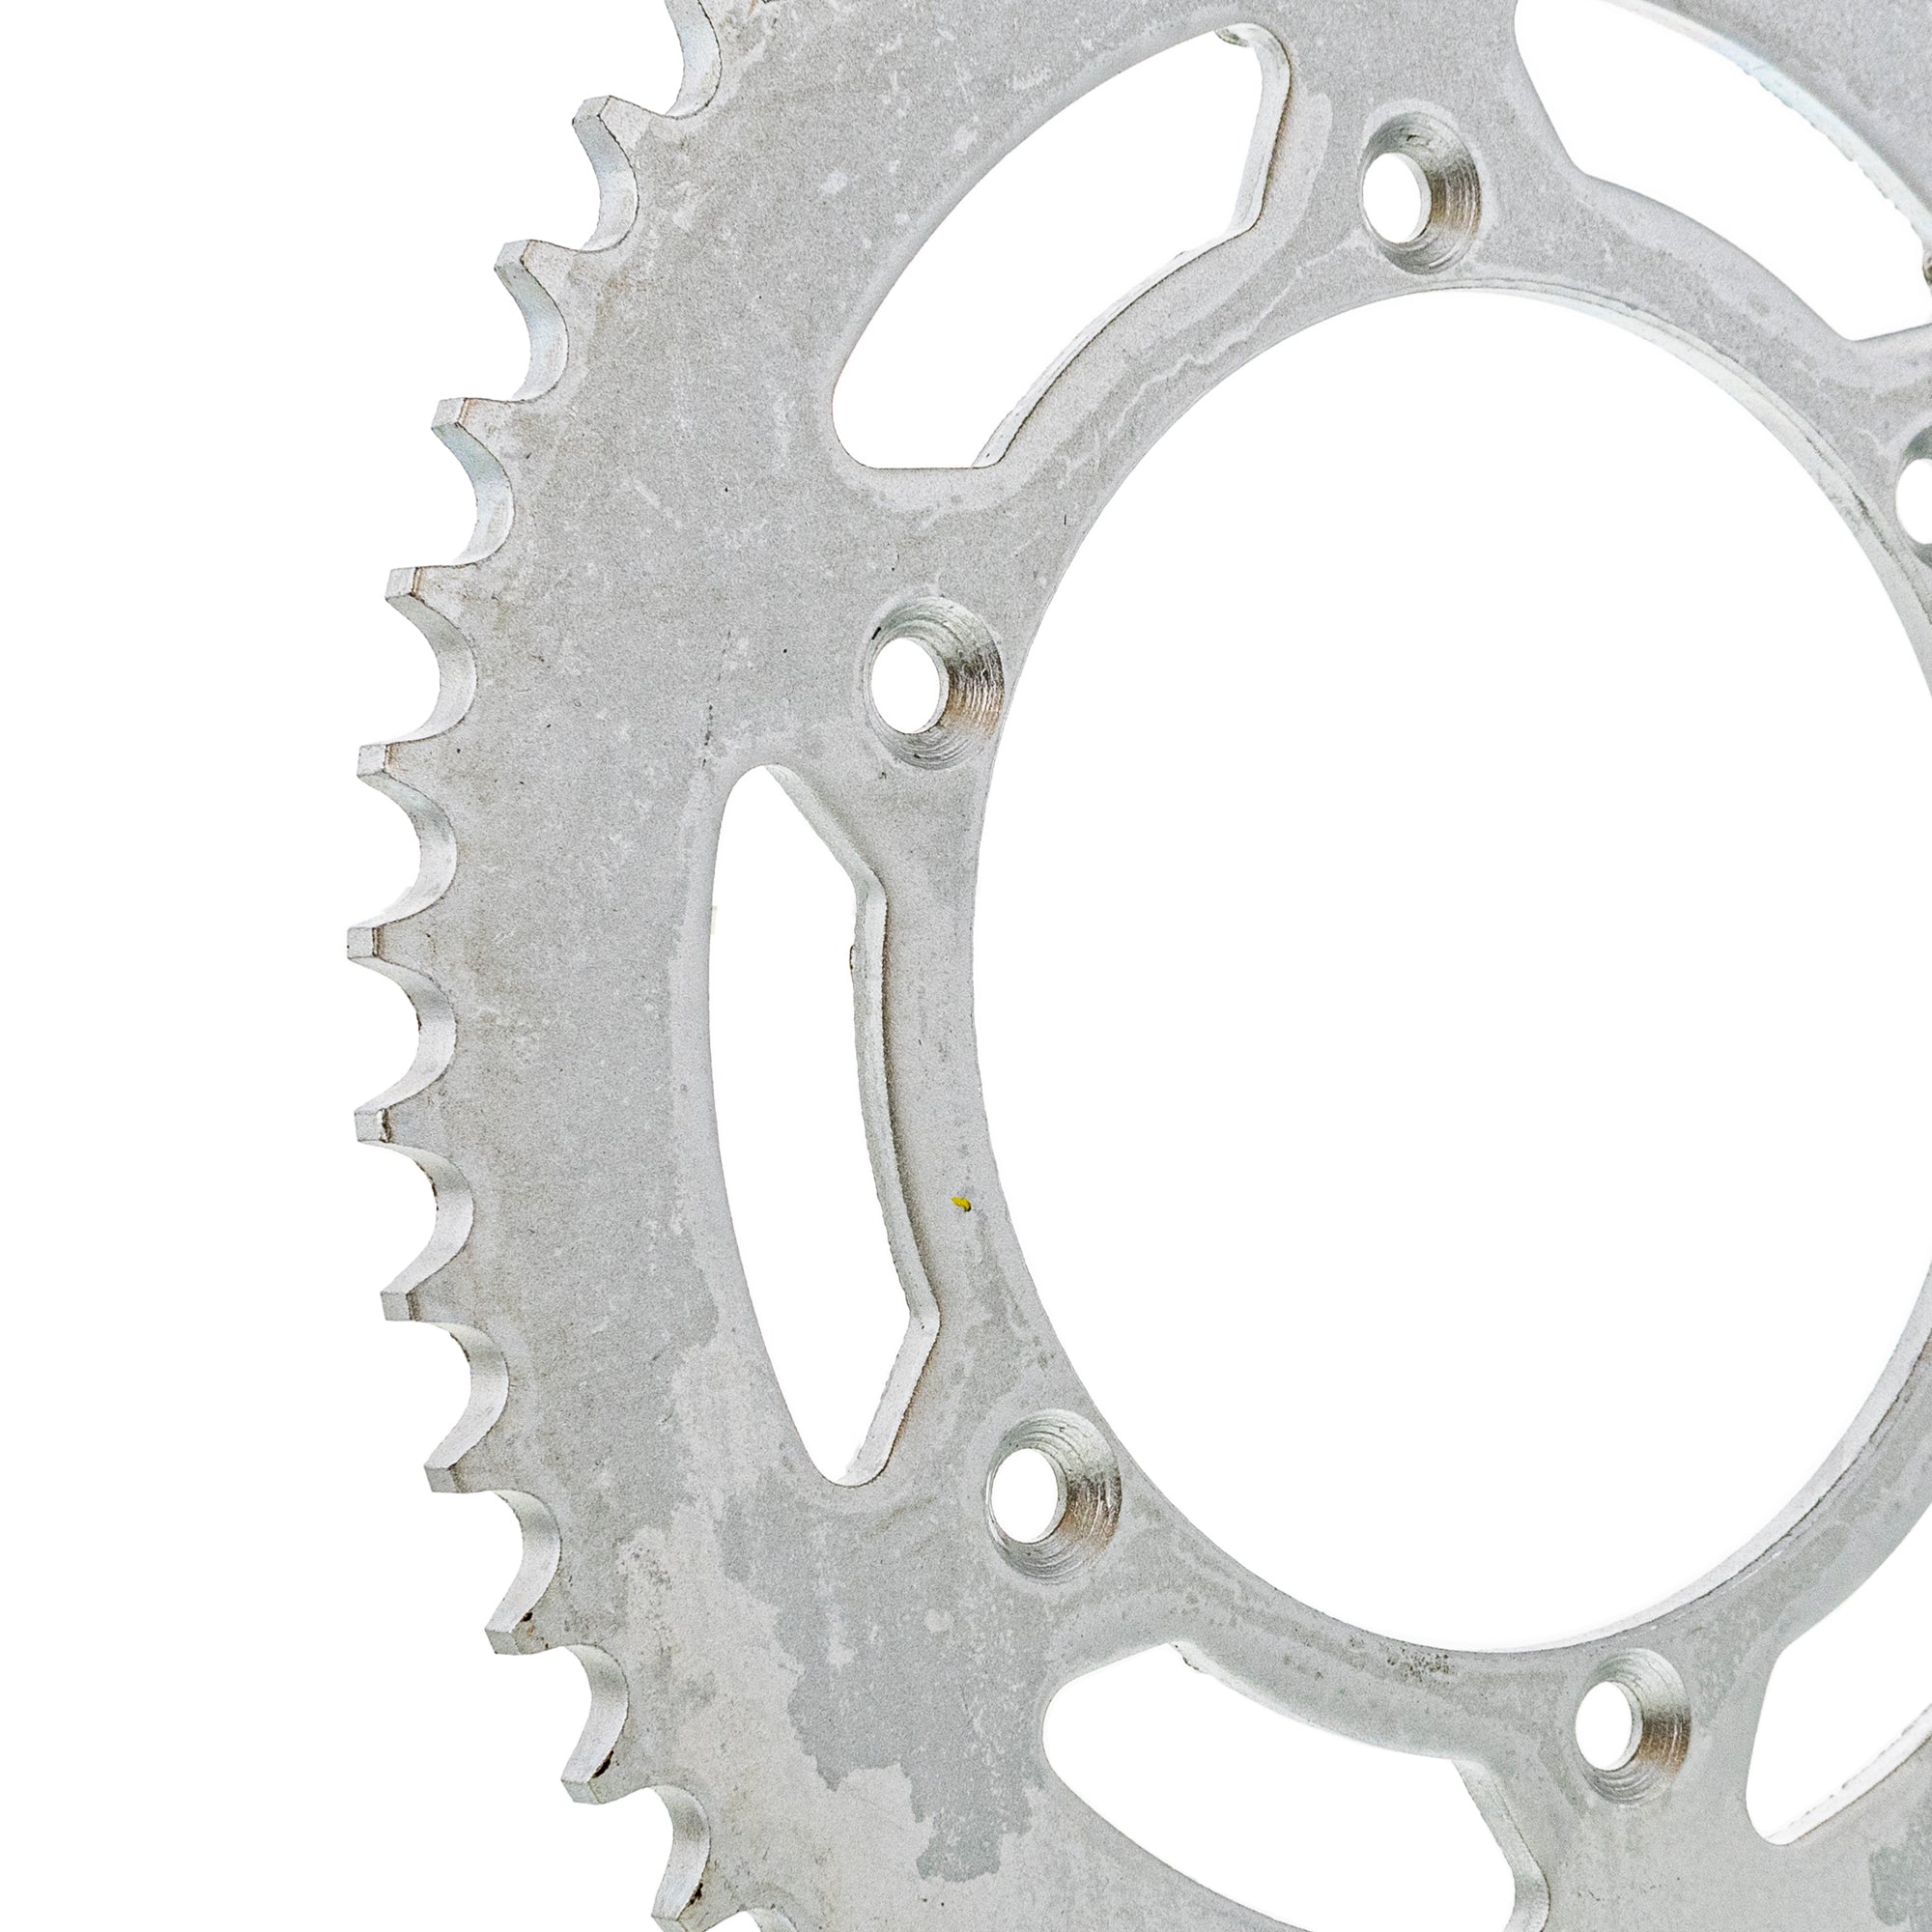 520 Pitch Front 14T Rear 52T Drive Sprocket Kit for Beta RR 250